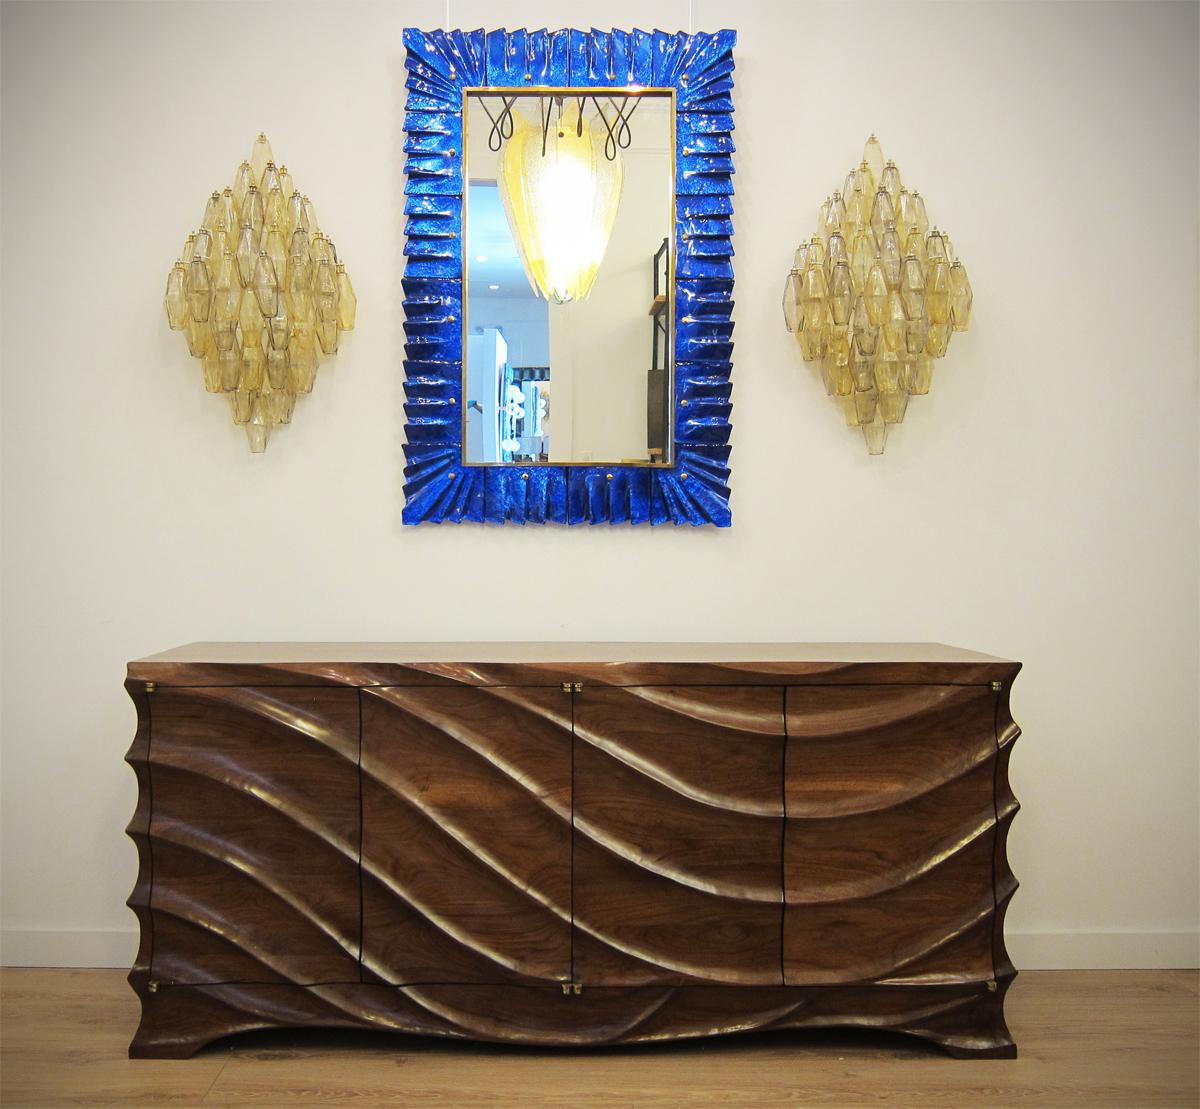 Rectangular Murano Cobalt Blue Glass Framed Mirror
Mirror plate surrounded with undulating glass tiles in cobalt blue color held by brass cabochons. 
Handcrafted by a team of artisans in Venice, Italy. 
Can be easily hung vertically or horizontally